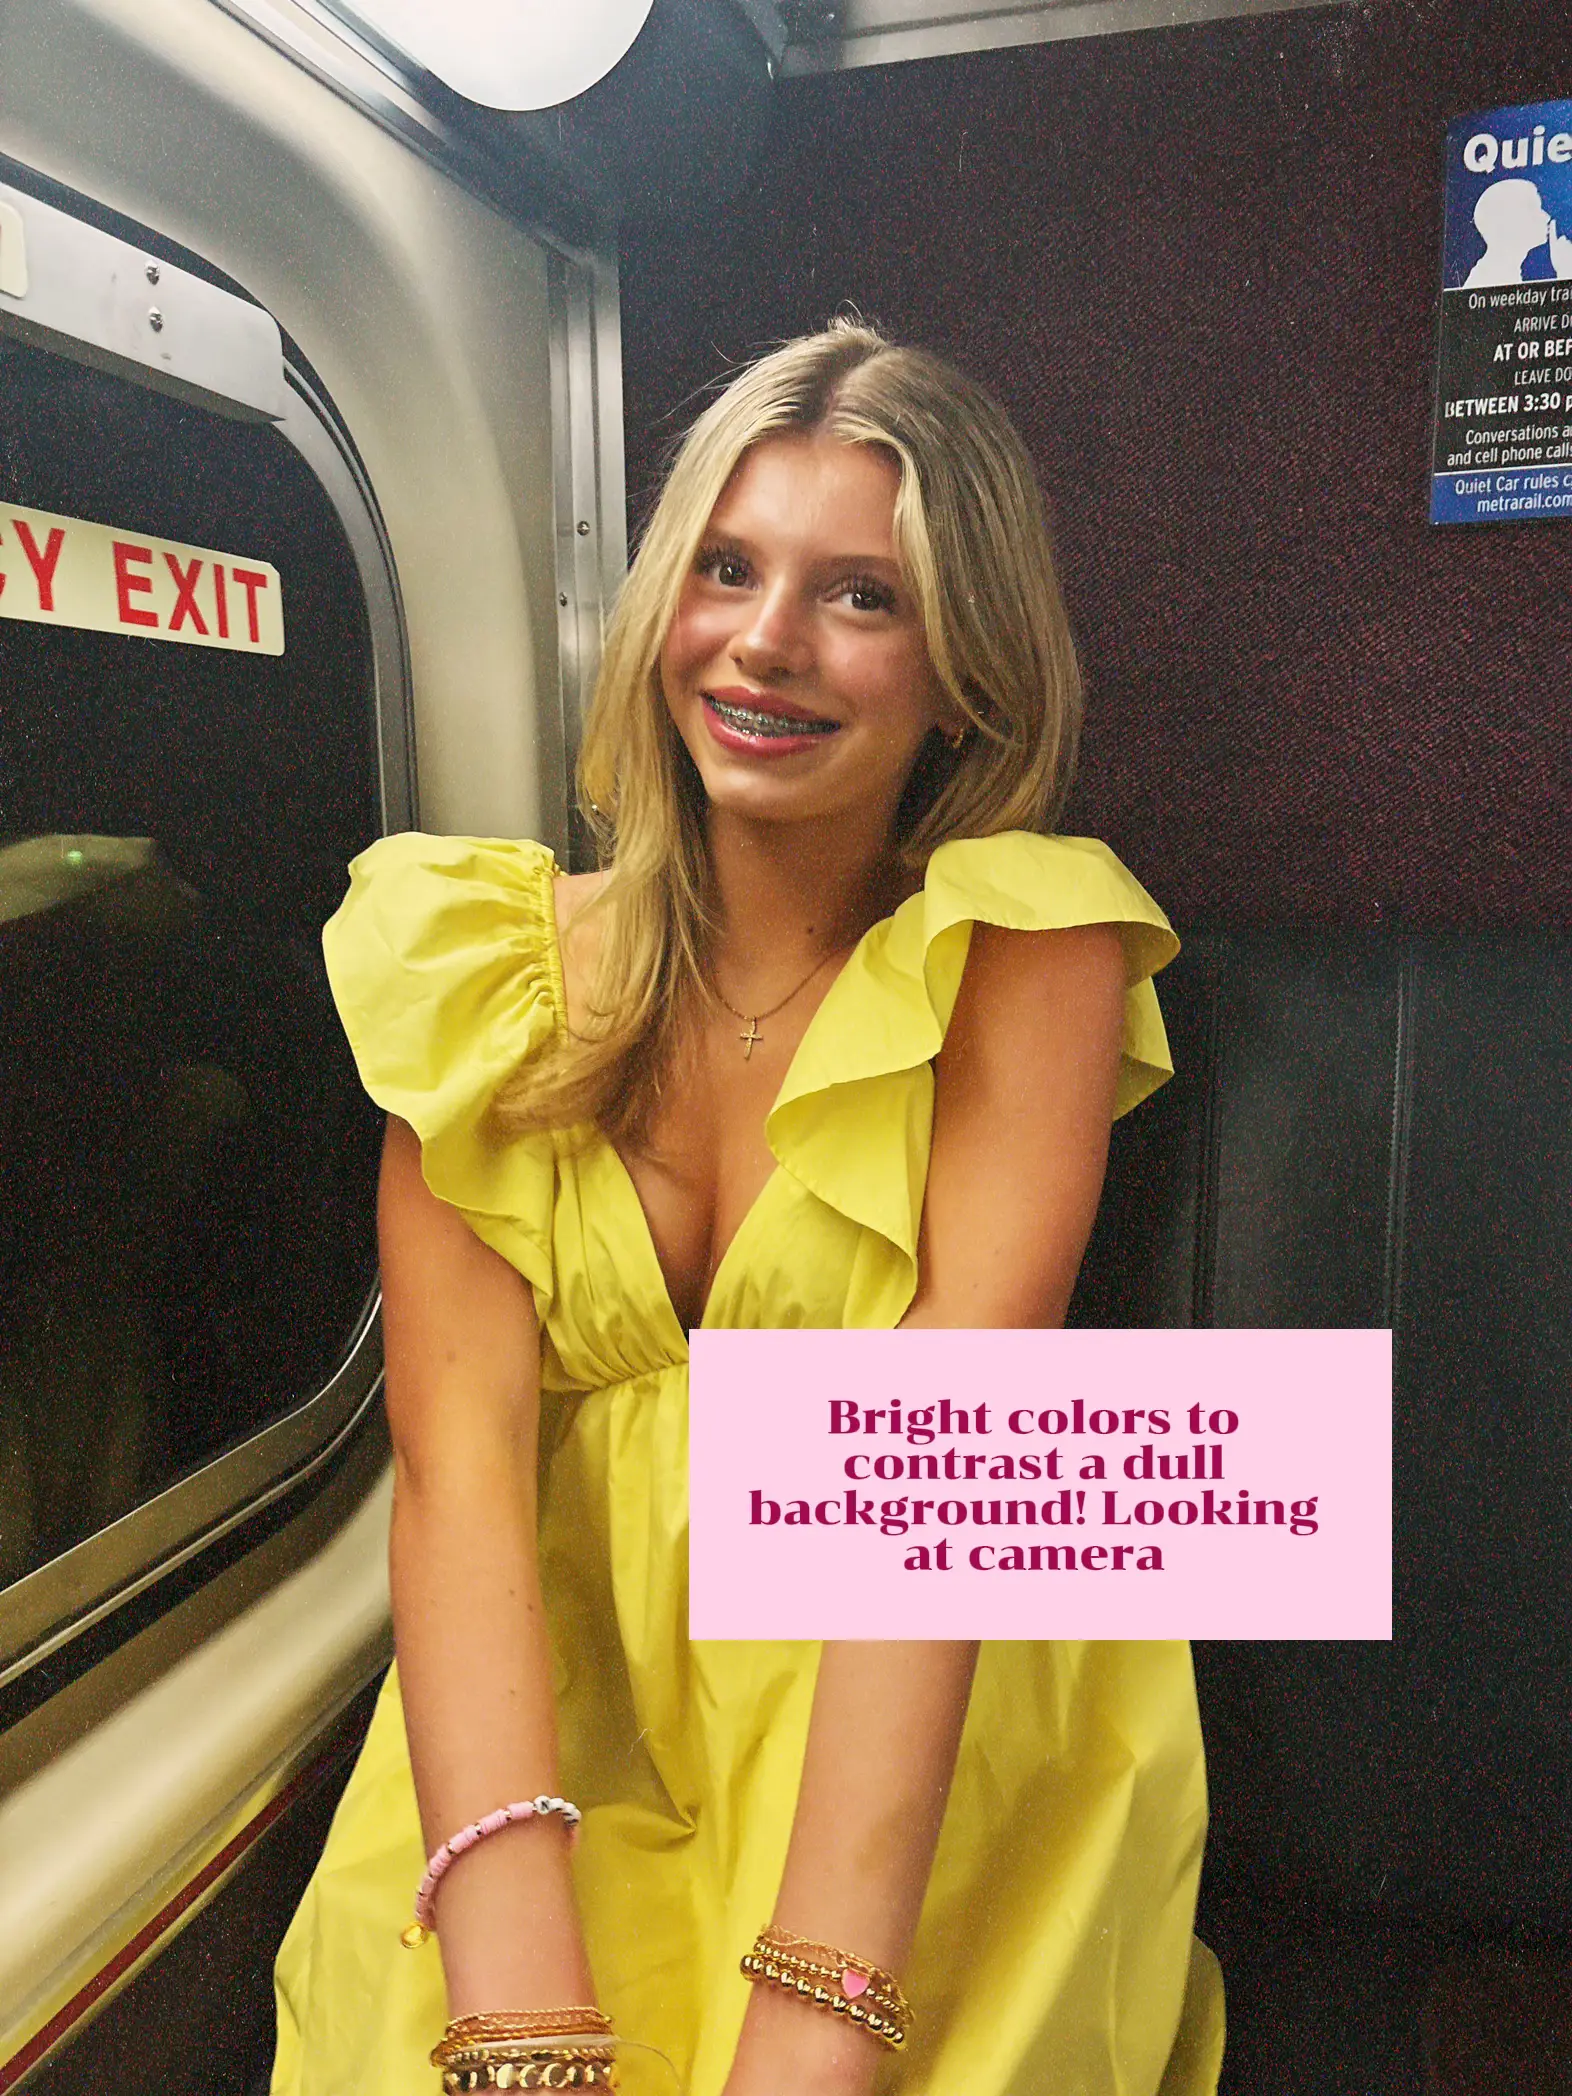  A woman in a yellow dress is sitting on a train.